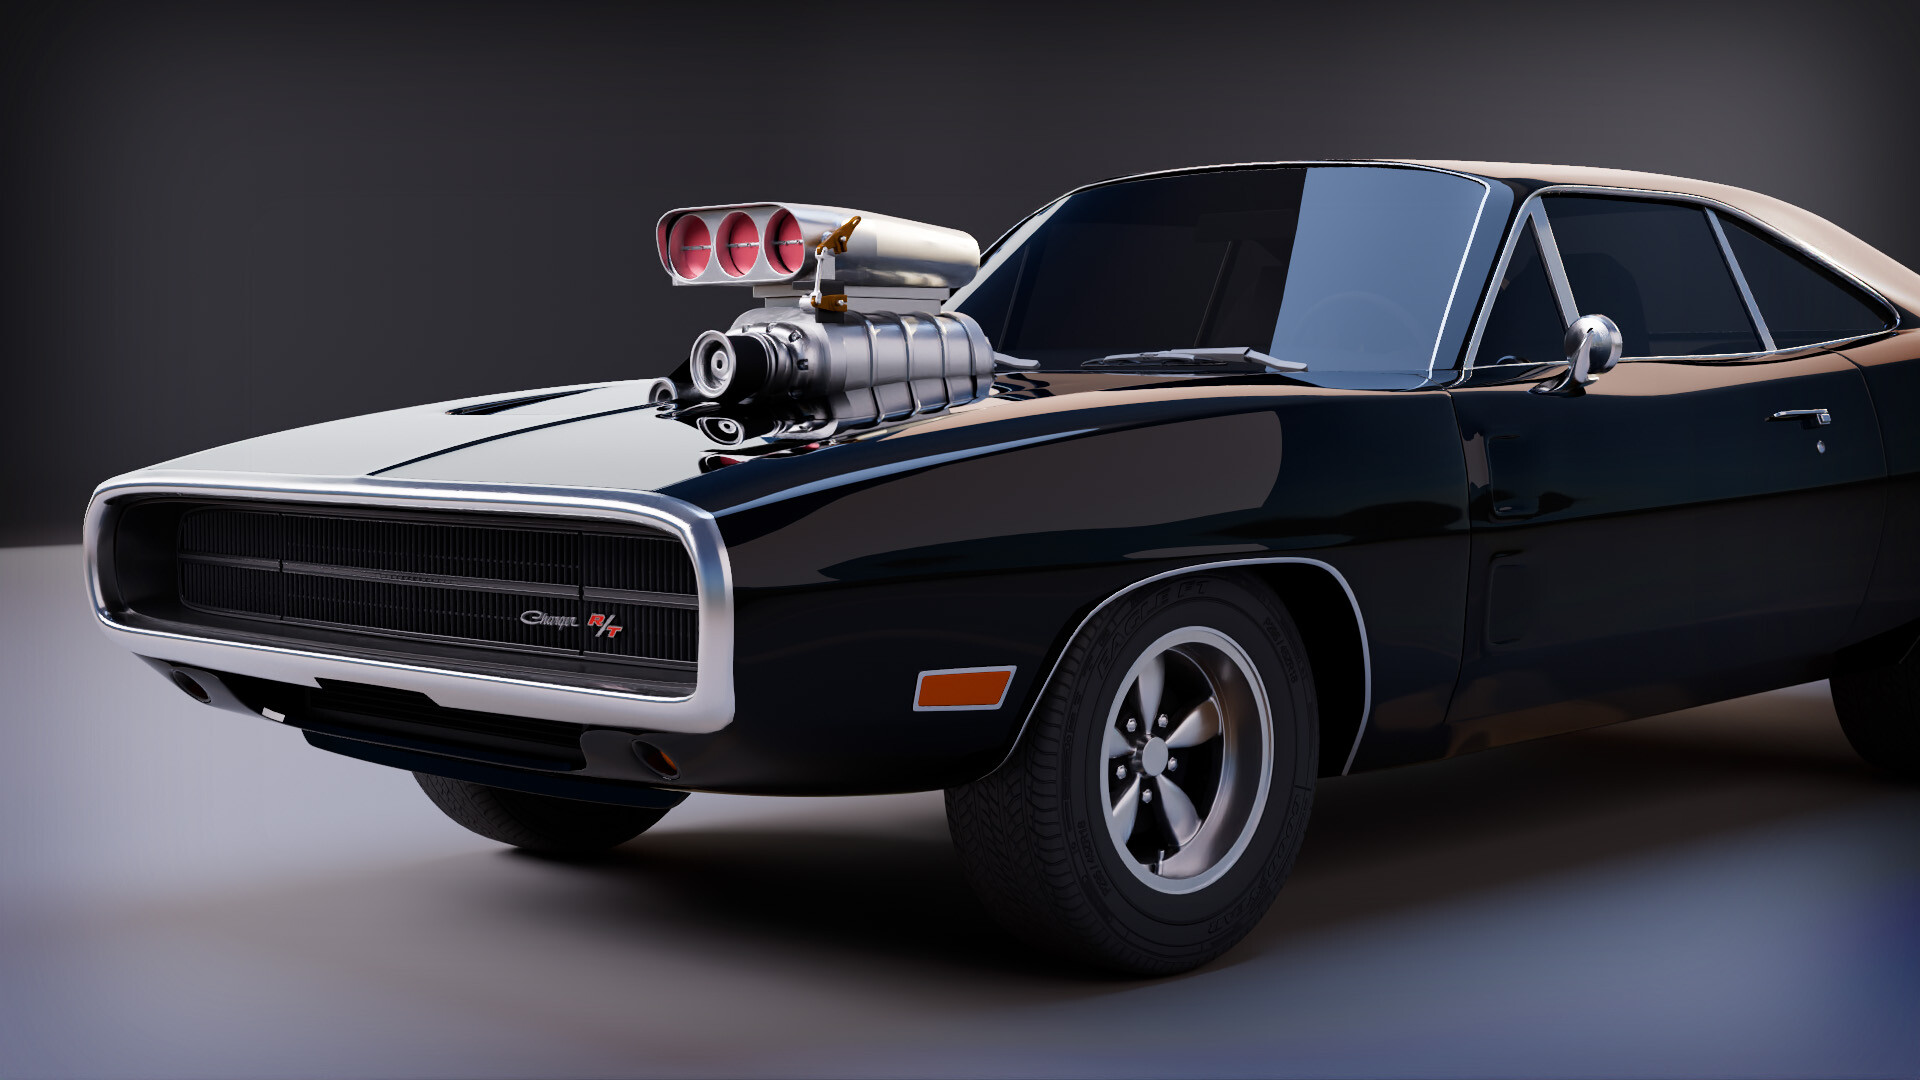 Fast & Furious' 1970 Dodge Charger R/T - Dominic Toretto's